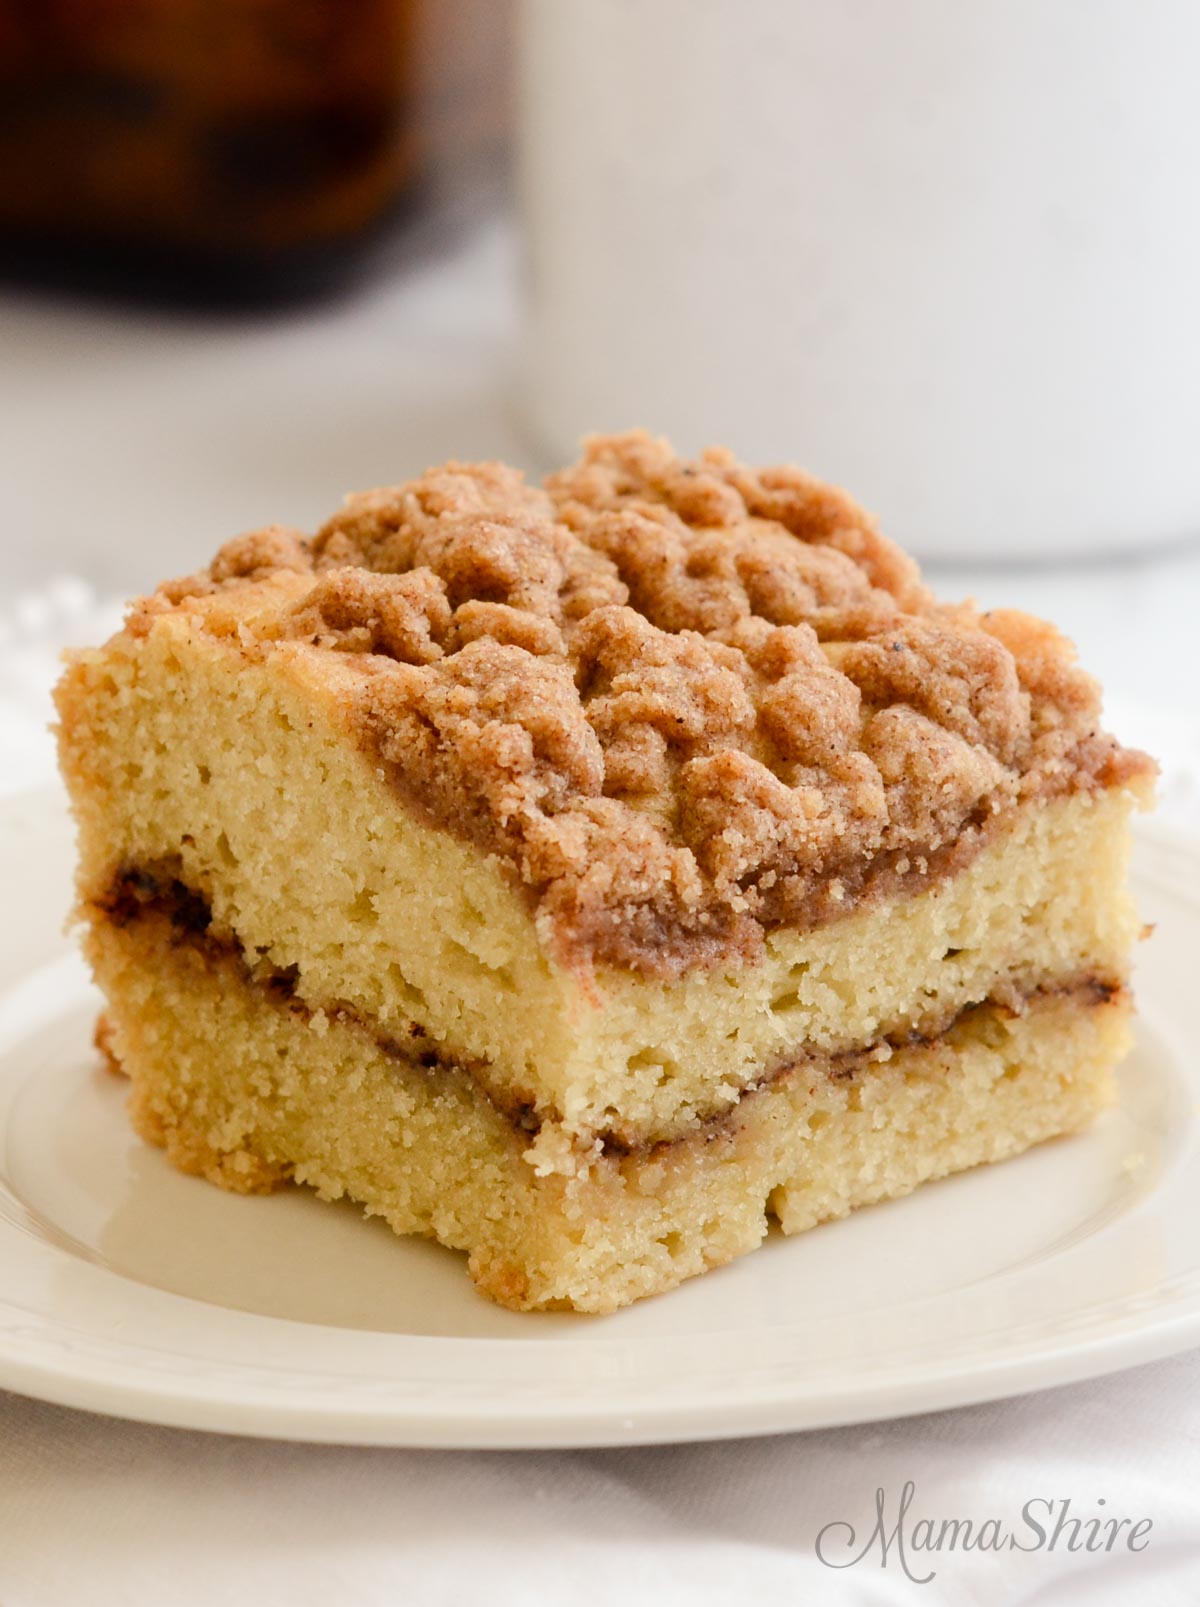 Gluten-free coffee cake with cinnamon streusel topping.